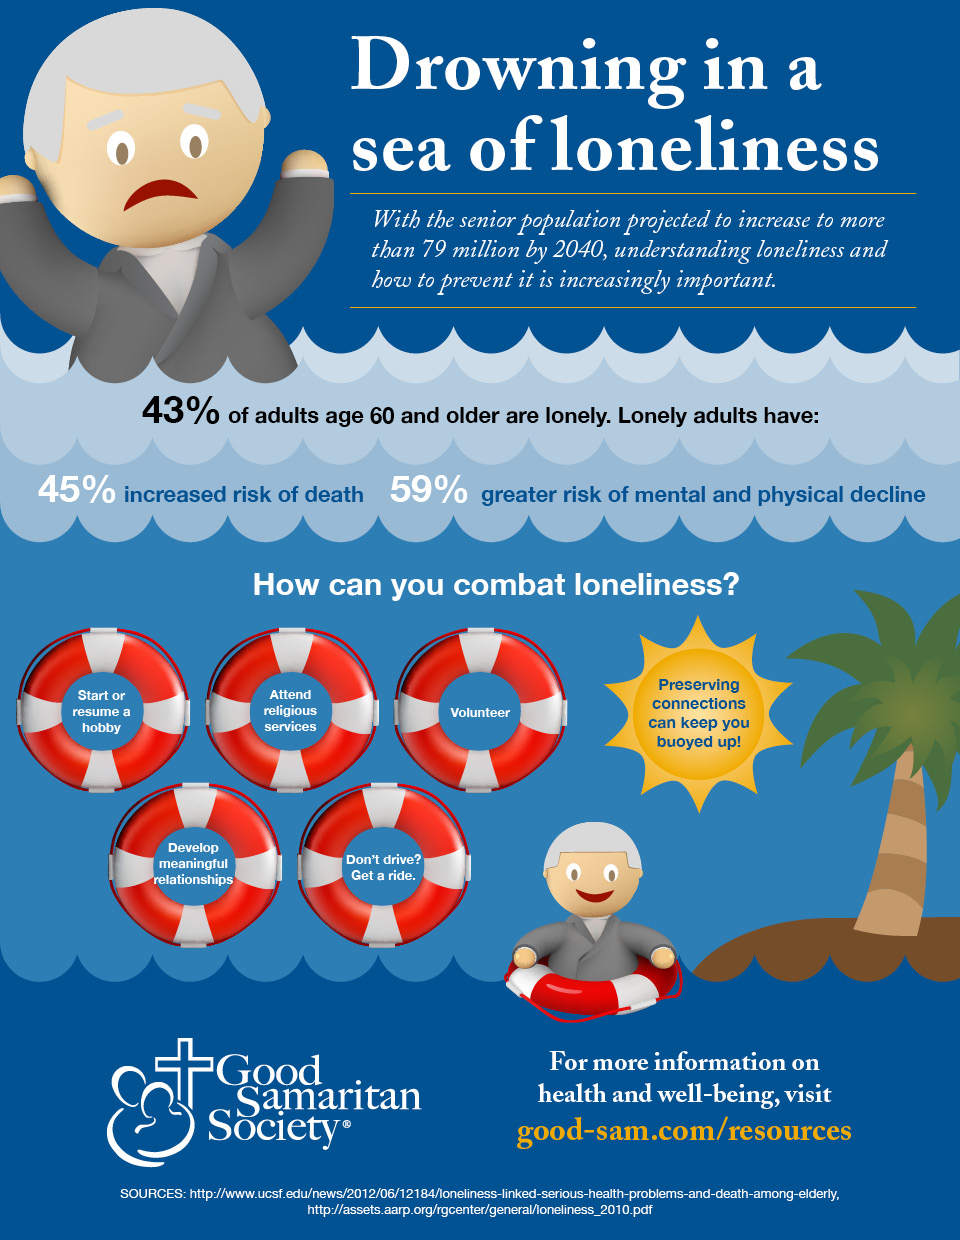 Loneliness infographic explaining that to combat loneliness you can start a hobby, attend religious services, volunteer or develop meaningful relationships. 